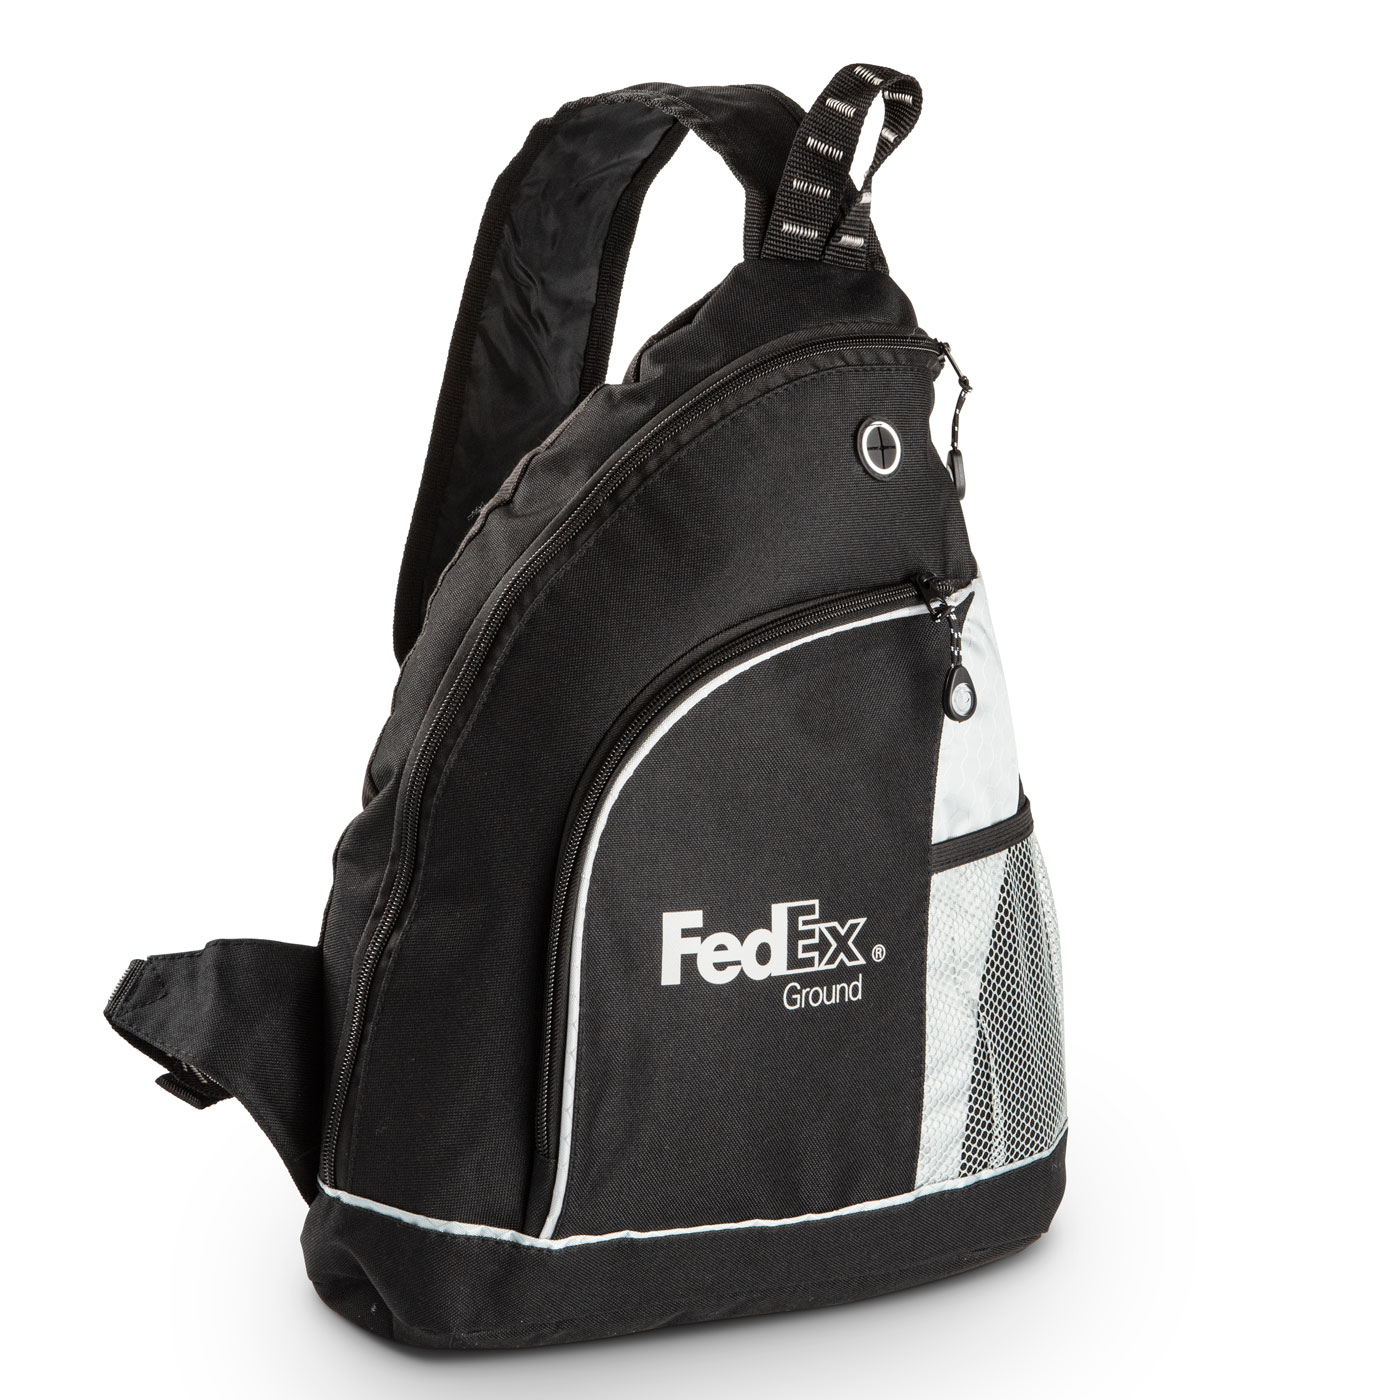 FedEx Ground Sling Pack The FedEx Company Store